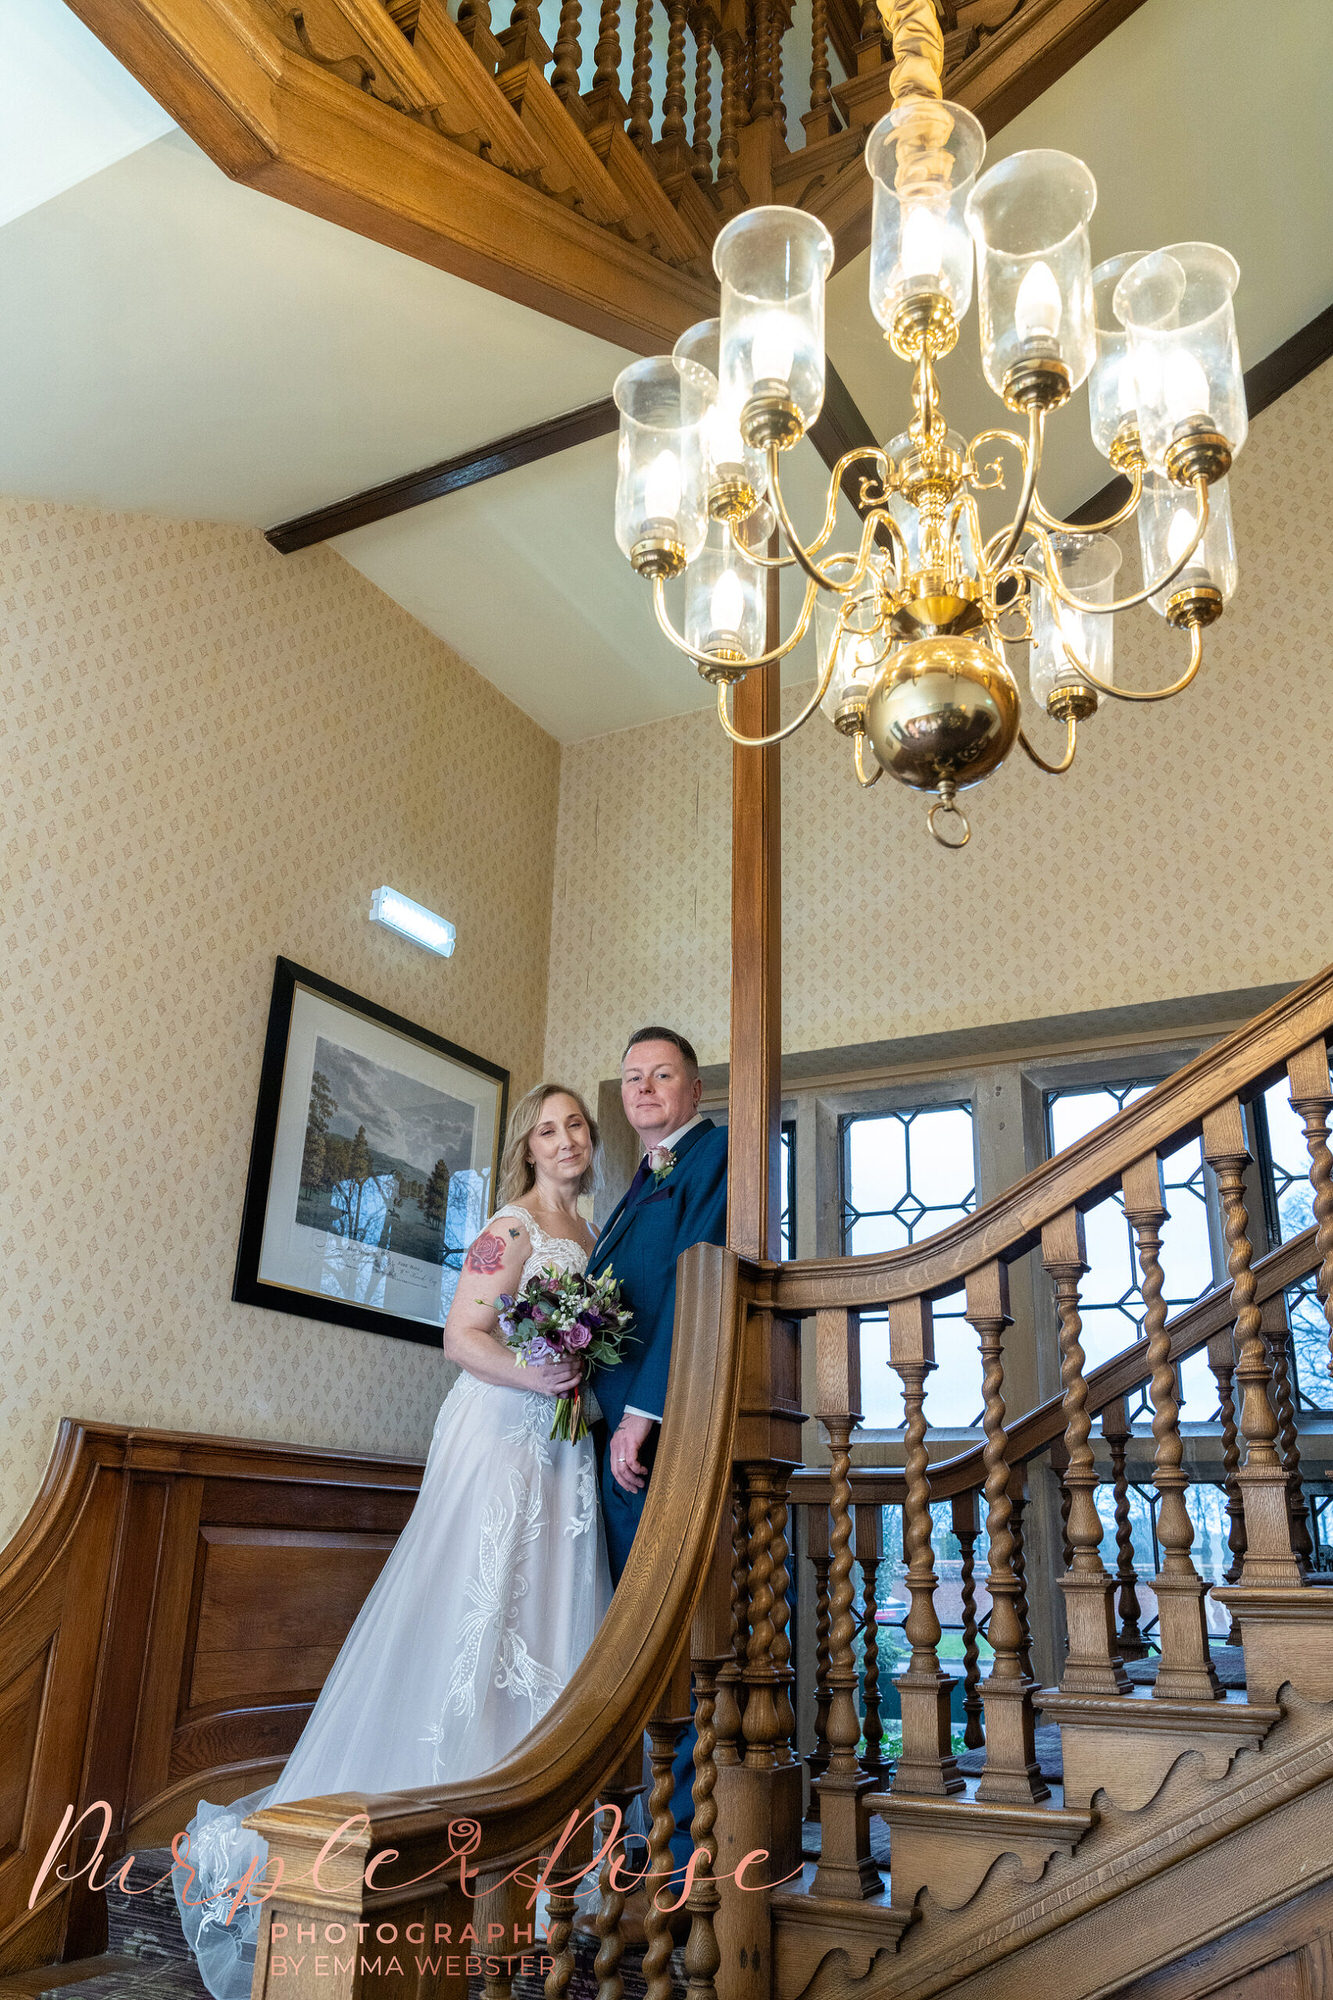 Bride and groom stood on winding staircase